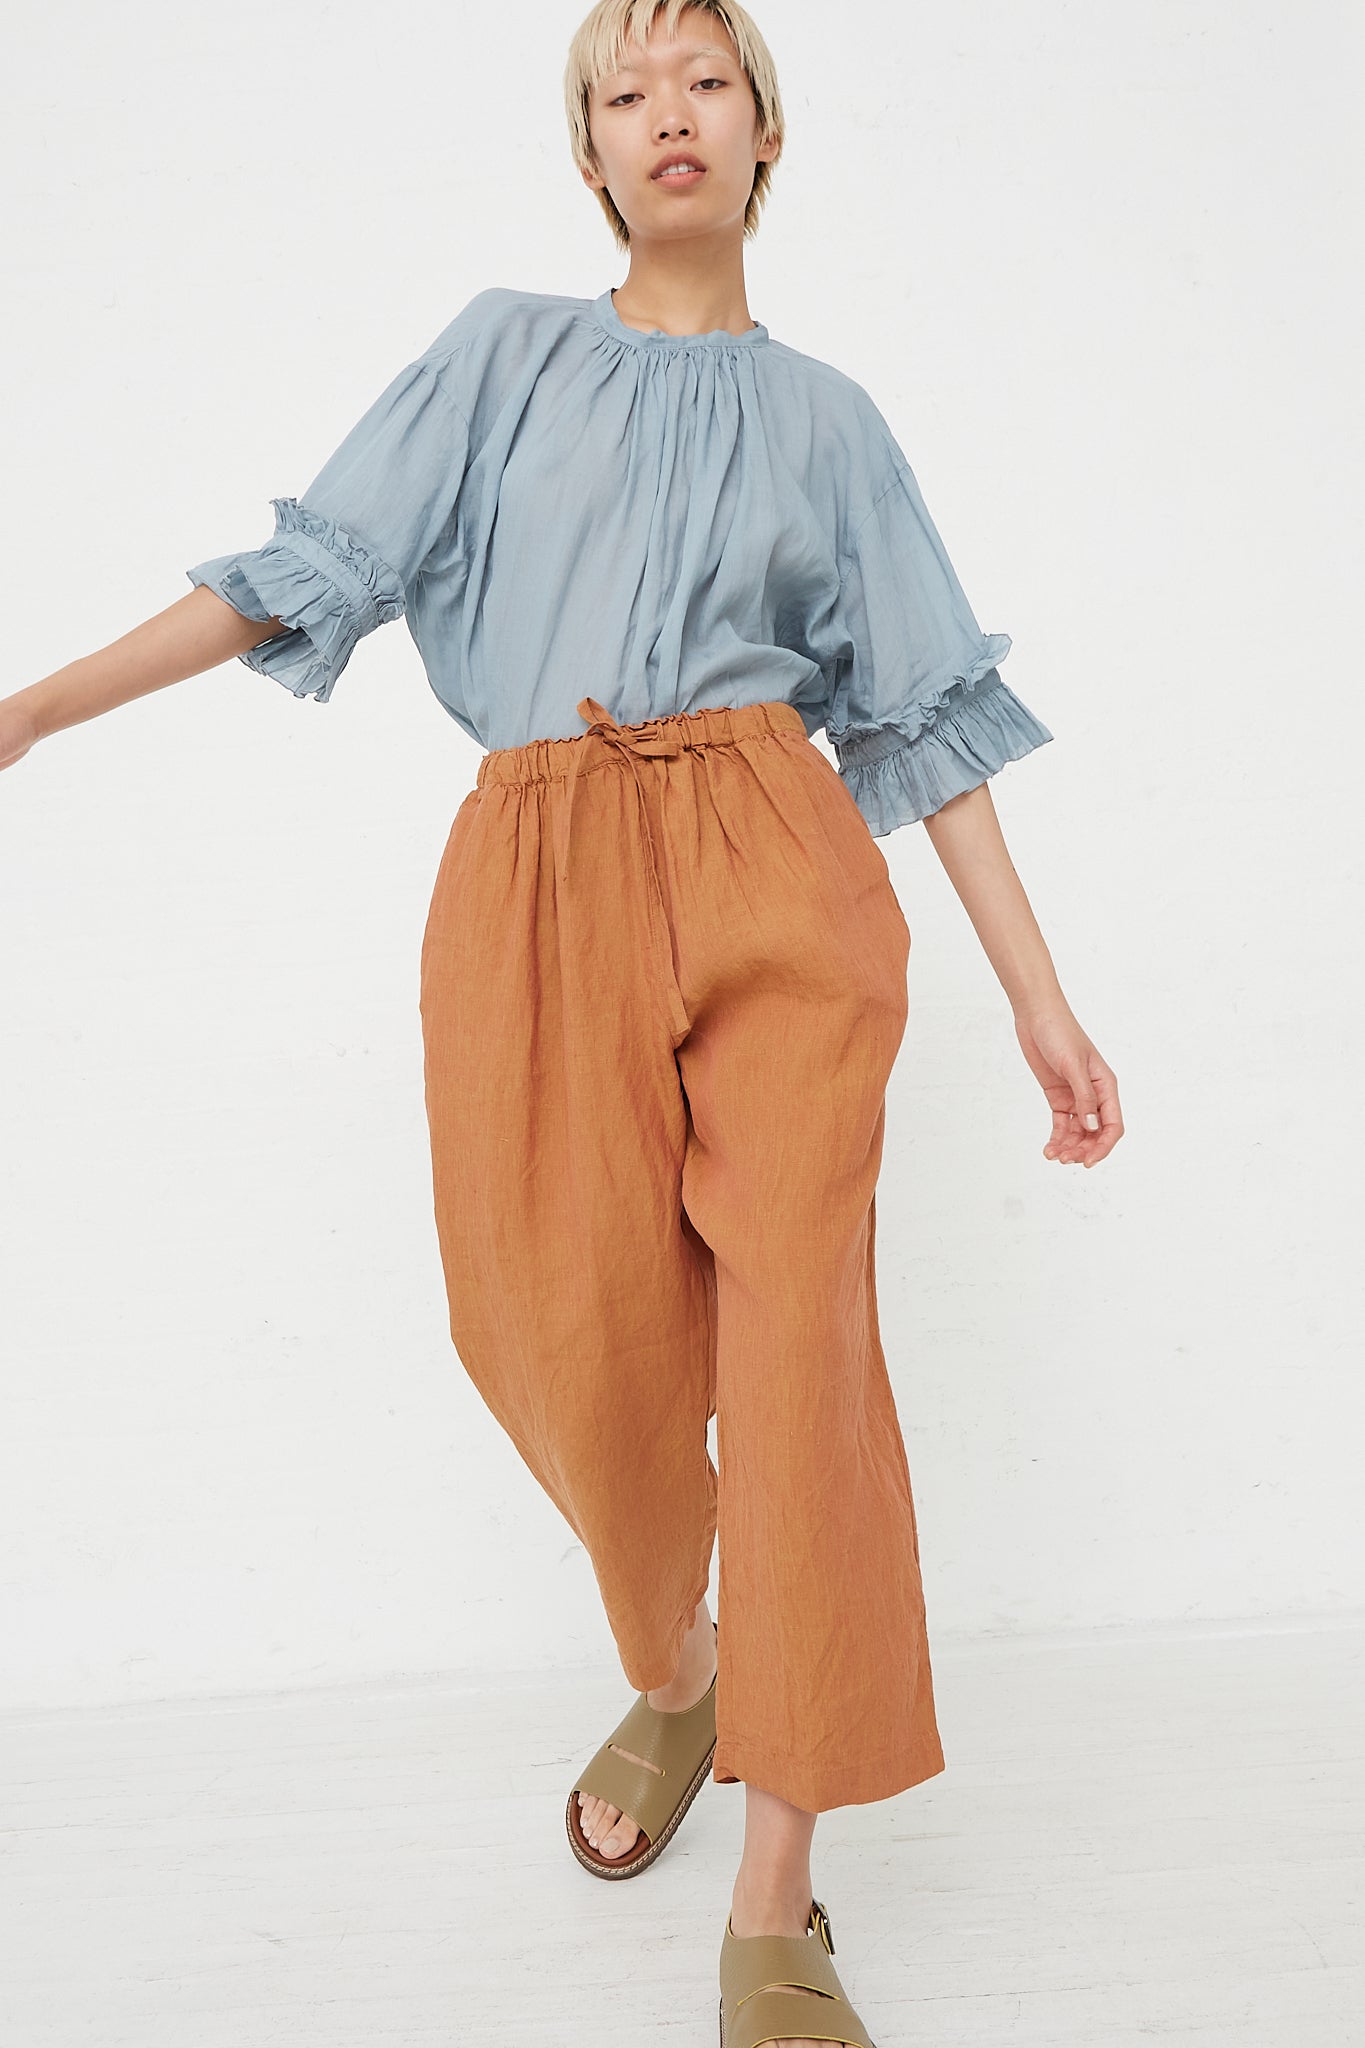 nest Robe - Hemp Yarn Dyed Easy Fit Pant in Brick front detail